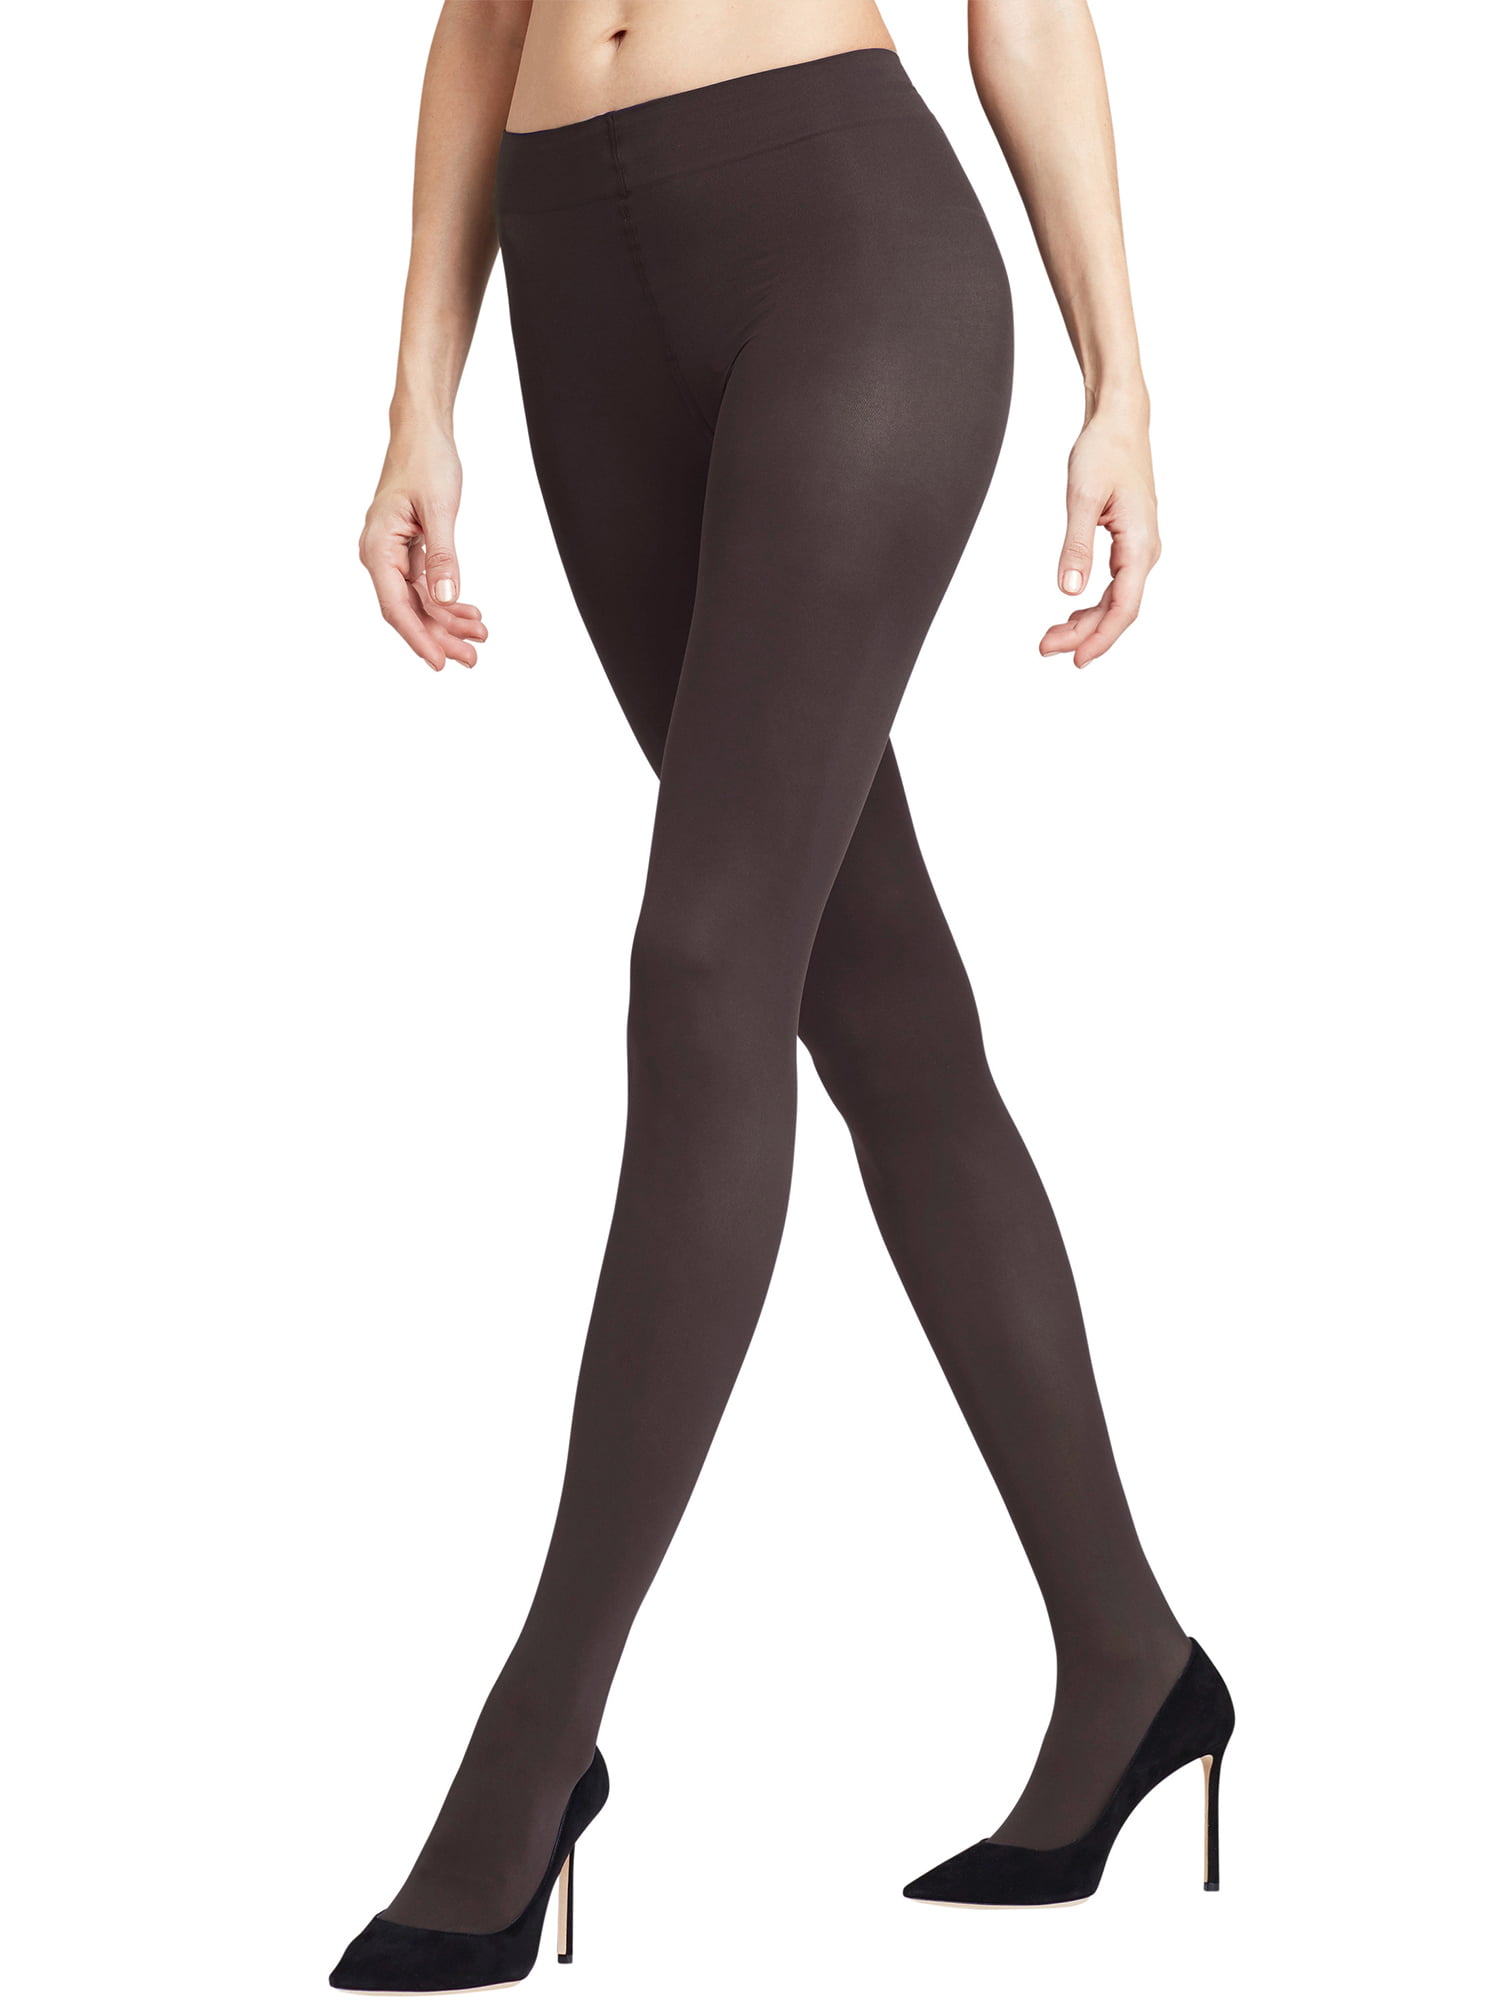 FALKE Synthetic Pure Matt 50 Tights in Black Womens Clothing Hosiery Tights and pantyhose 